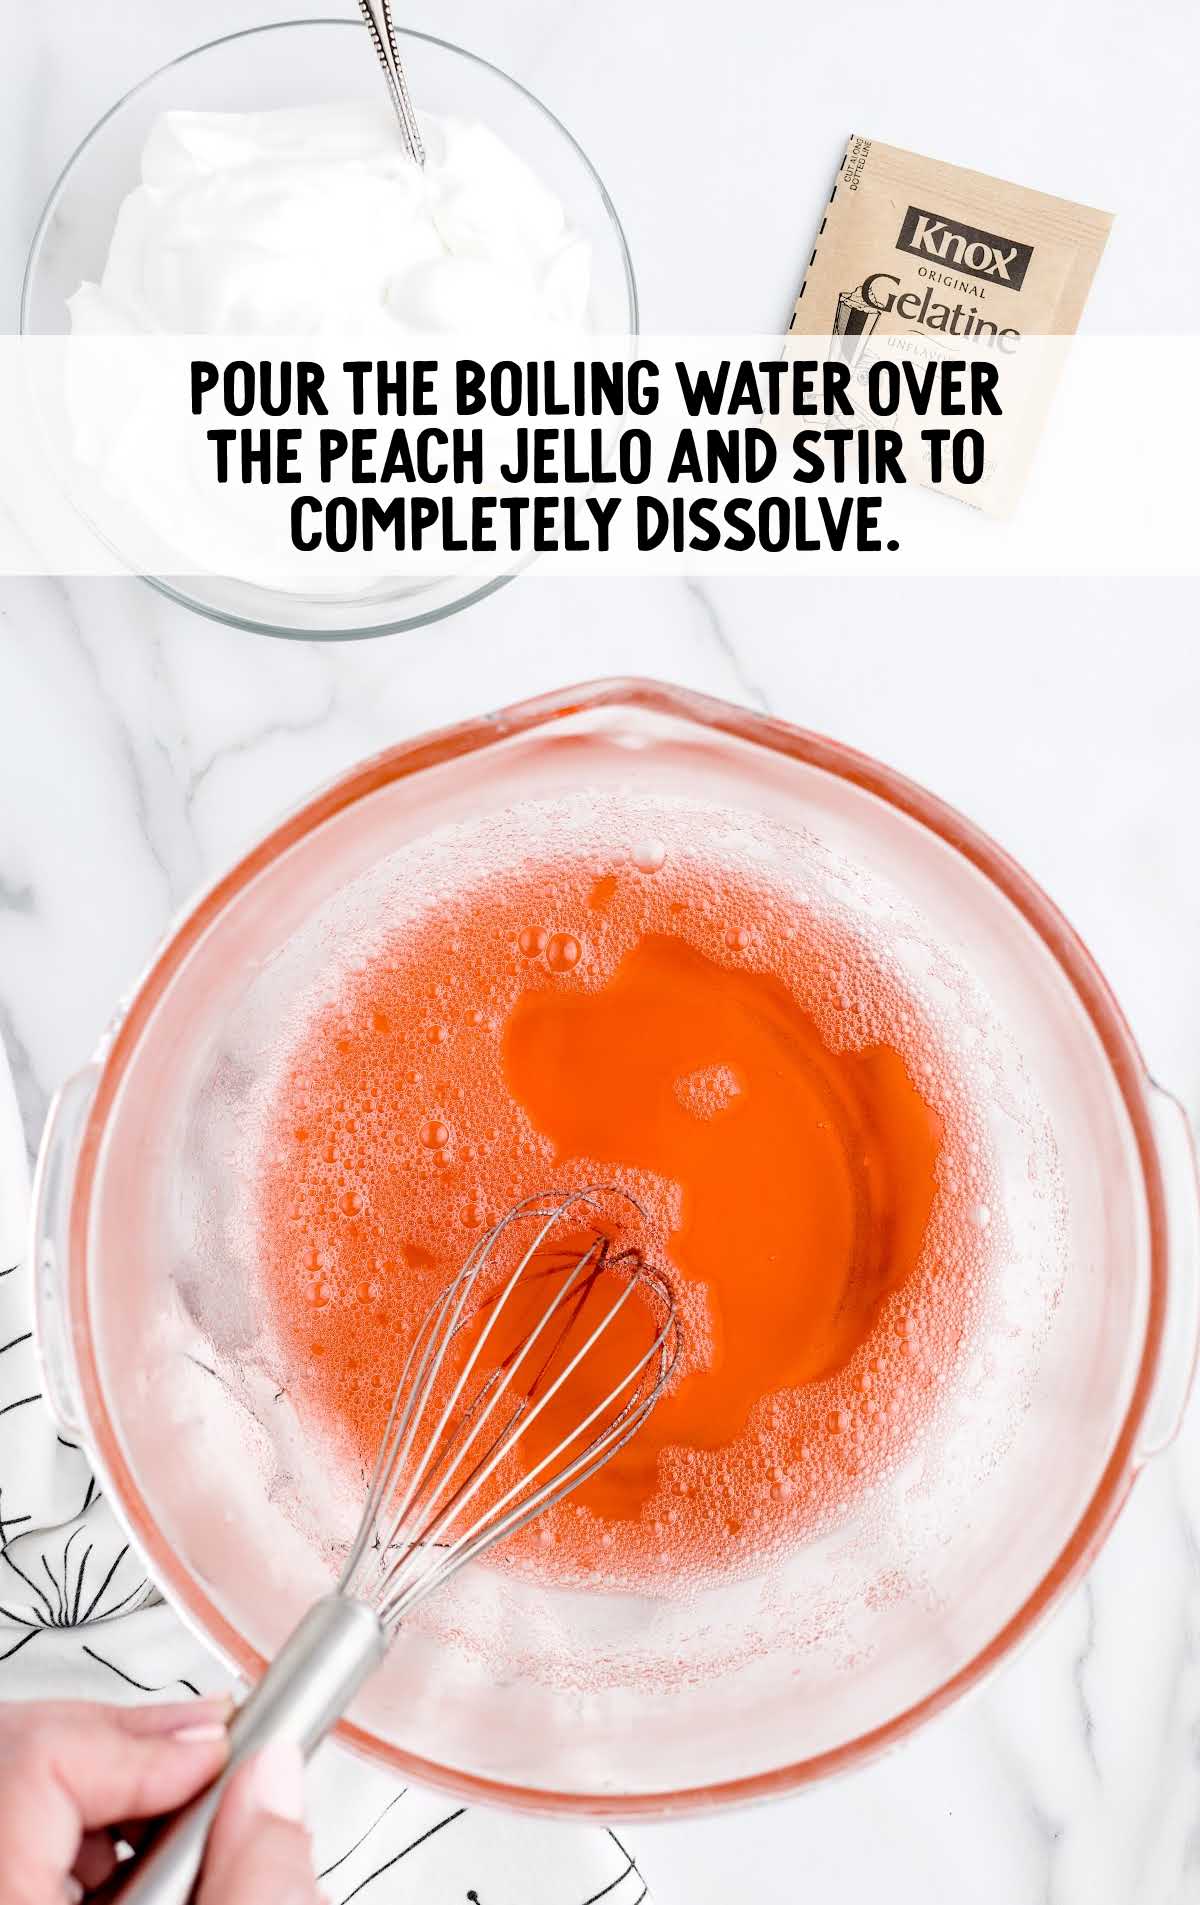 boiling water poured over the peach jello and stirred in a bowl